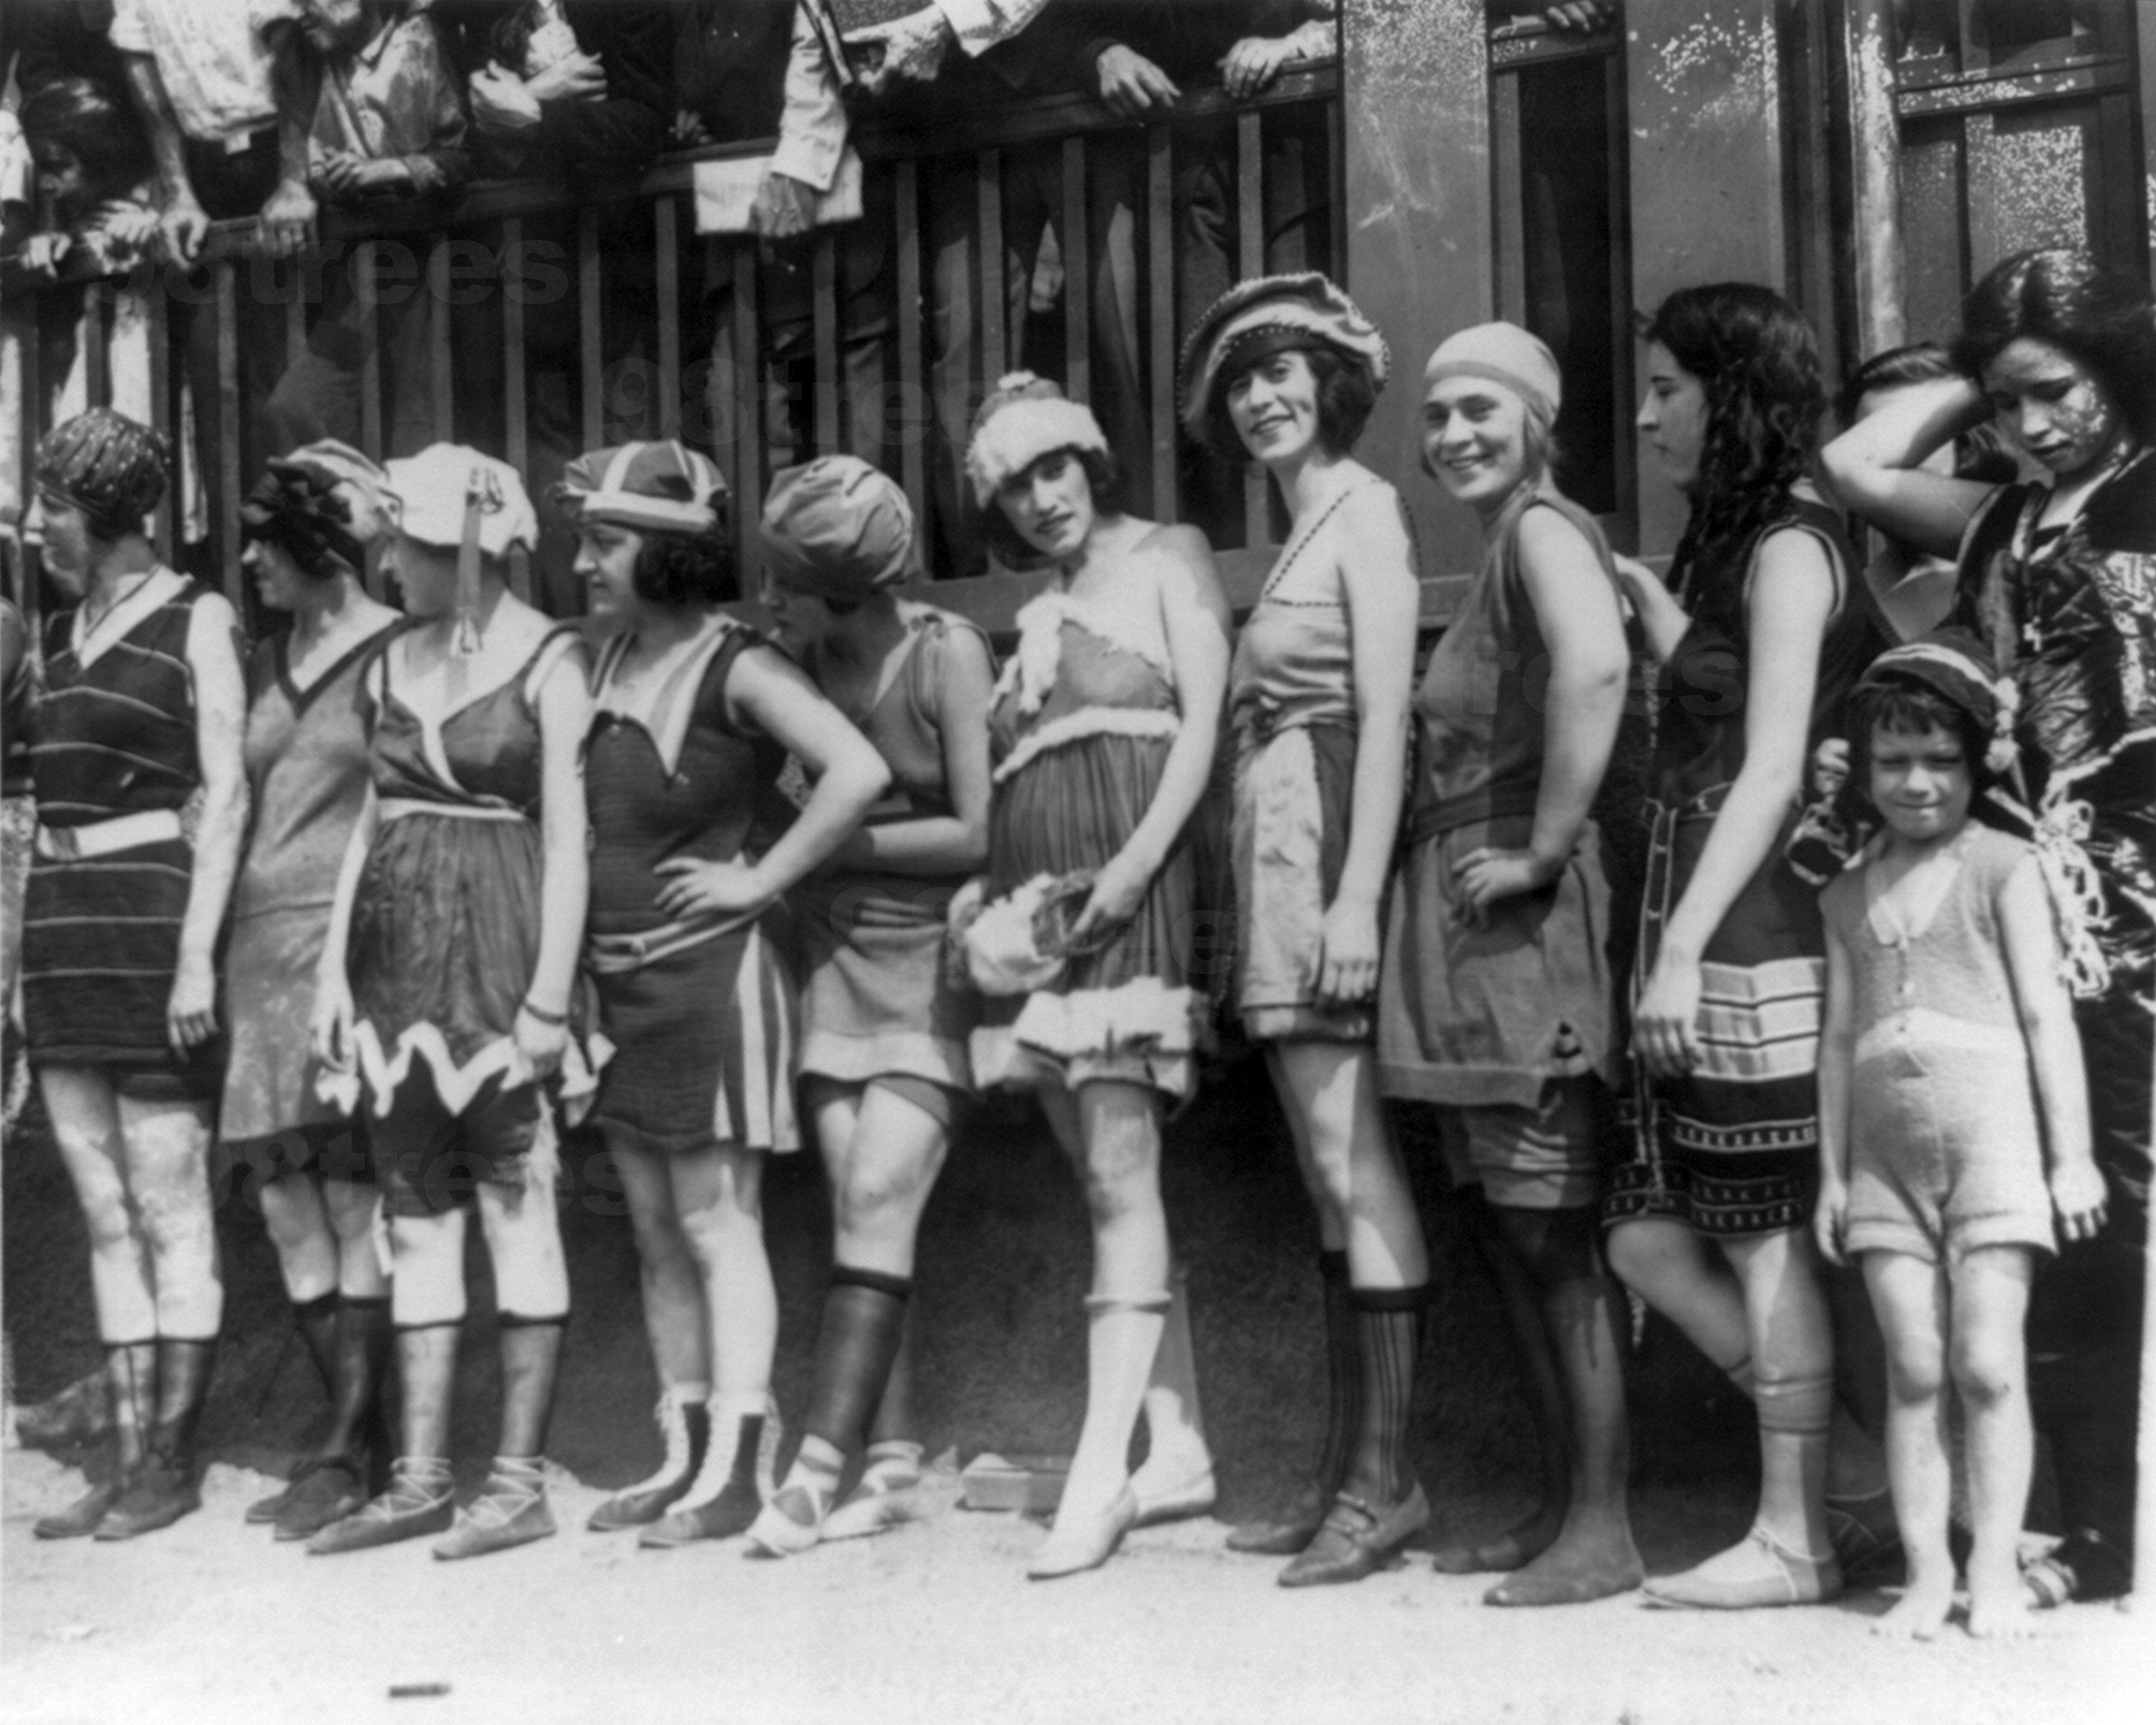 11 Beautiful Vintage Bathing Suits From The 1920s And '30s | atelier ...